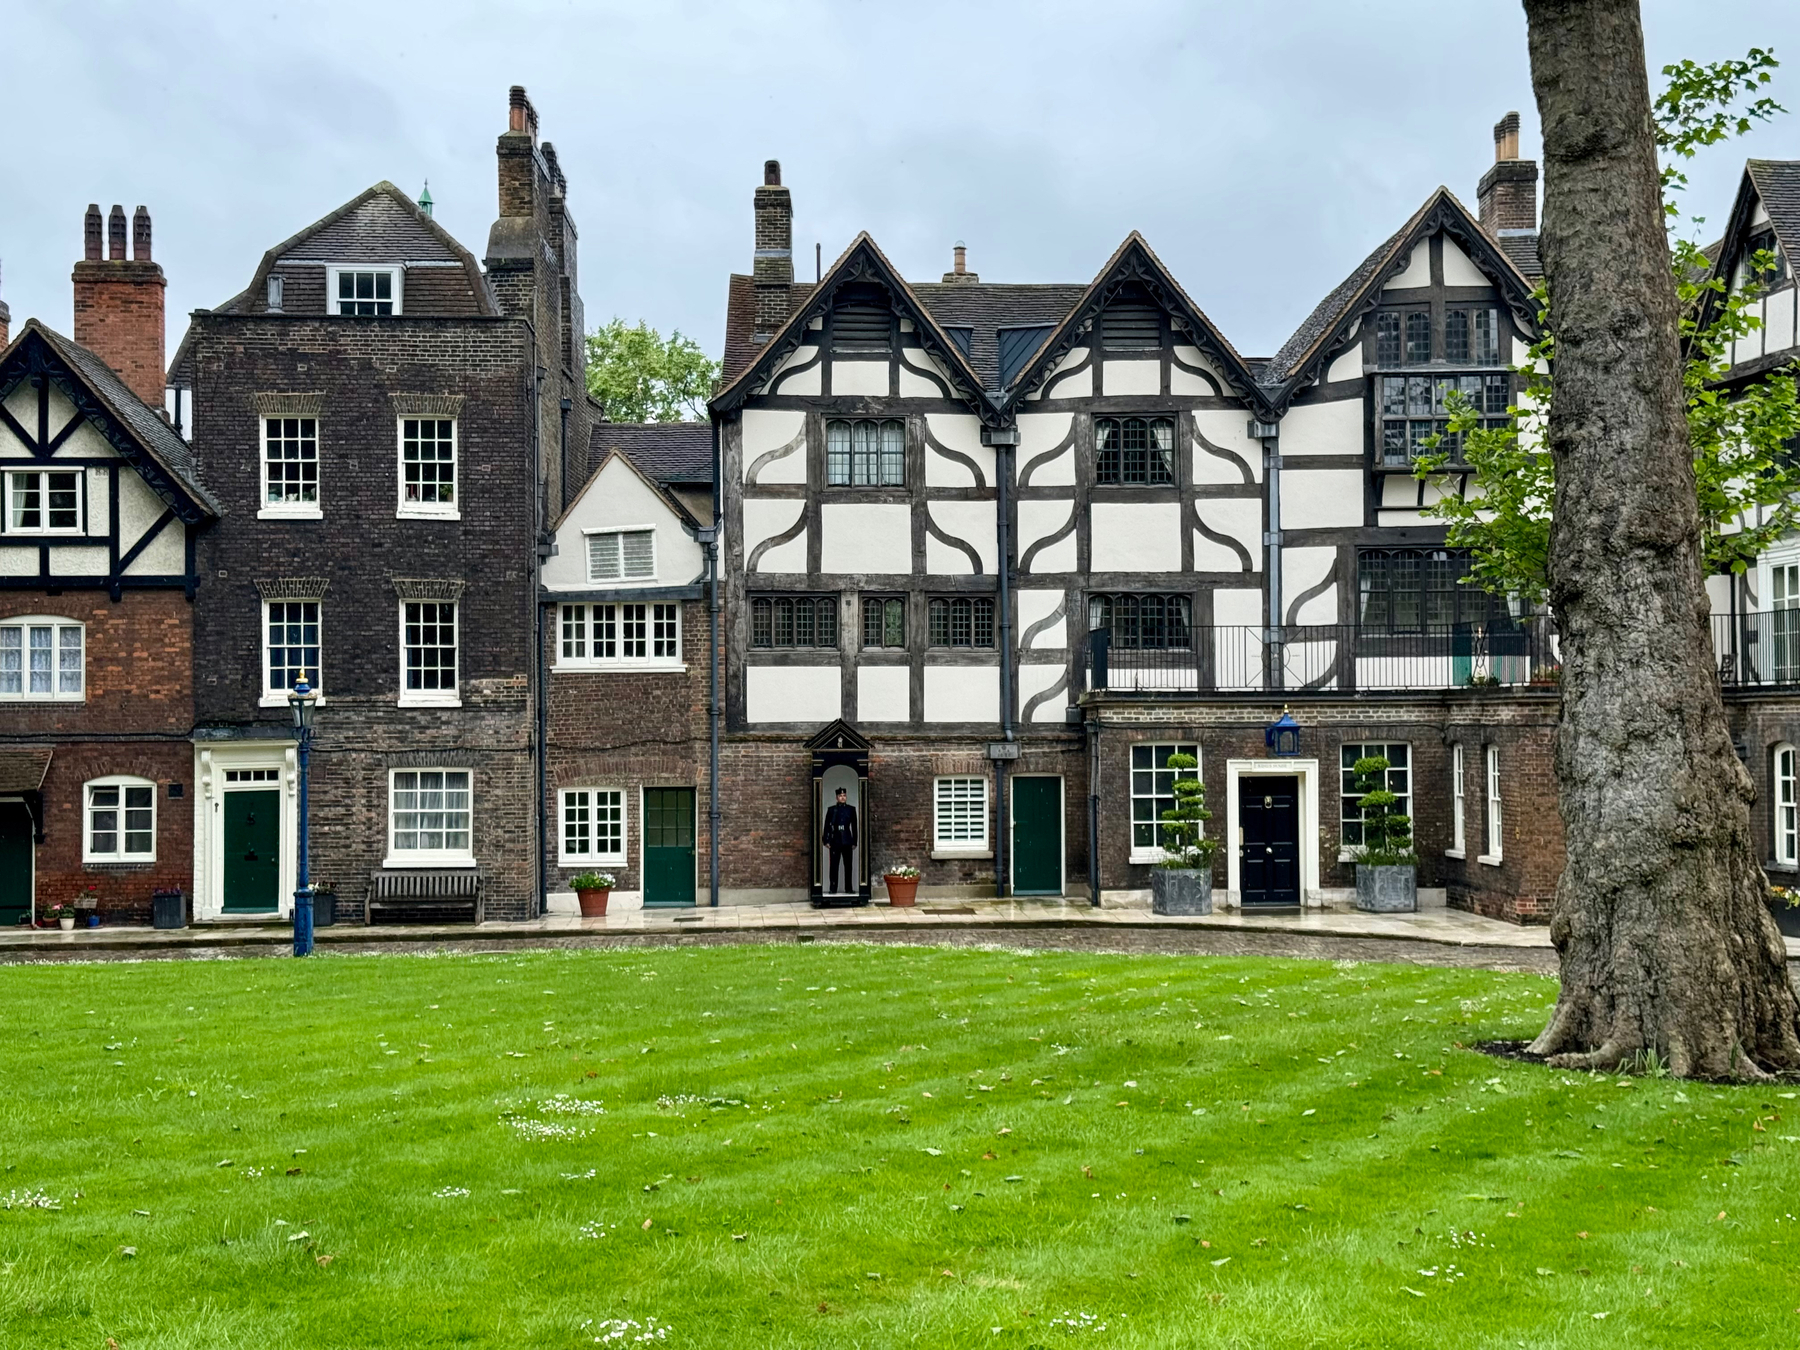 The Queen’s house among other traditional English Tudor-style buildings with white and black timber framing, surrounding a green lawn with a tree to the right. There is a person standing by the entrance of the central building.